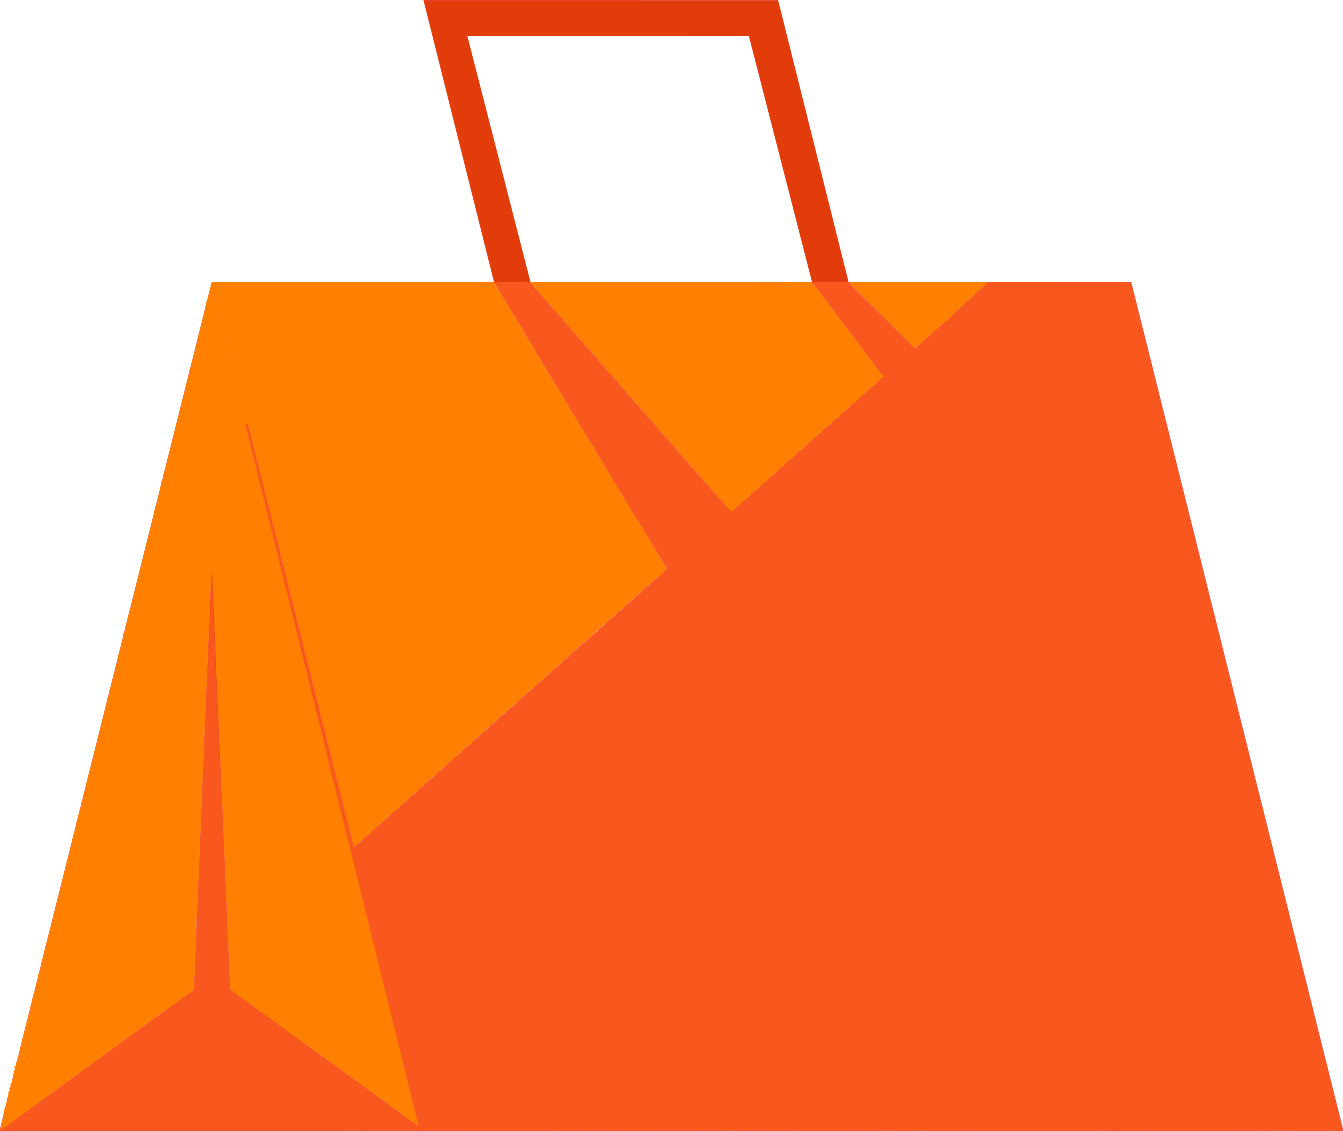 Shopping Bag for 'The Quick Brown Fox' shopping website